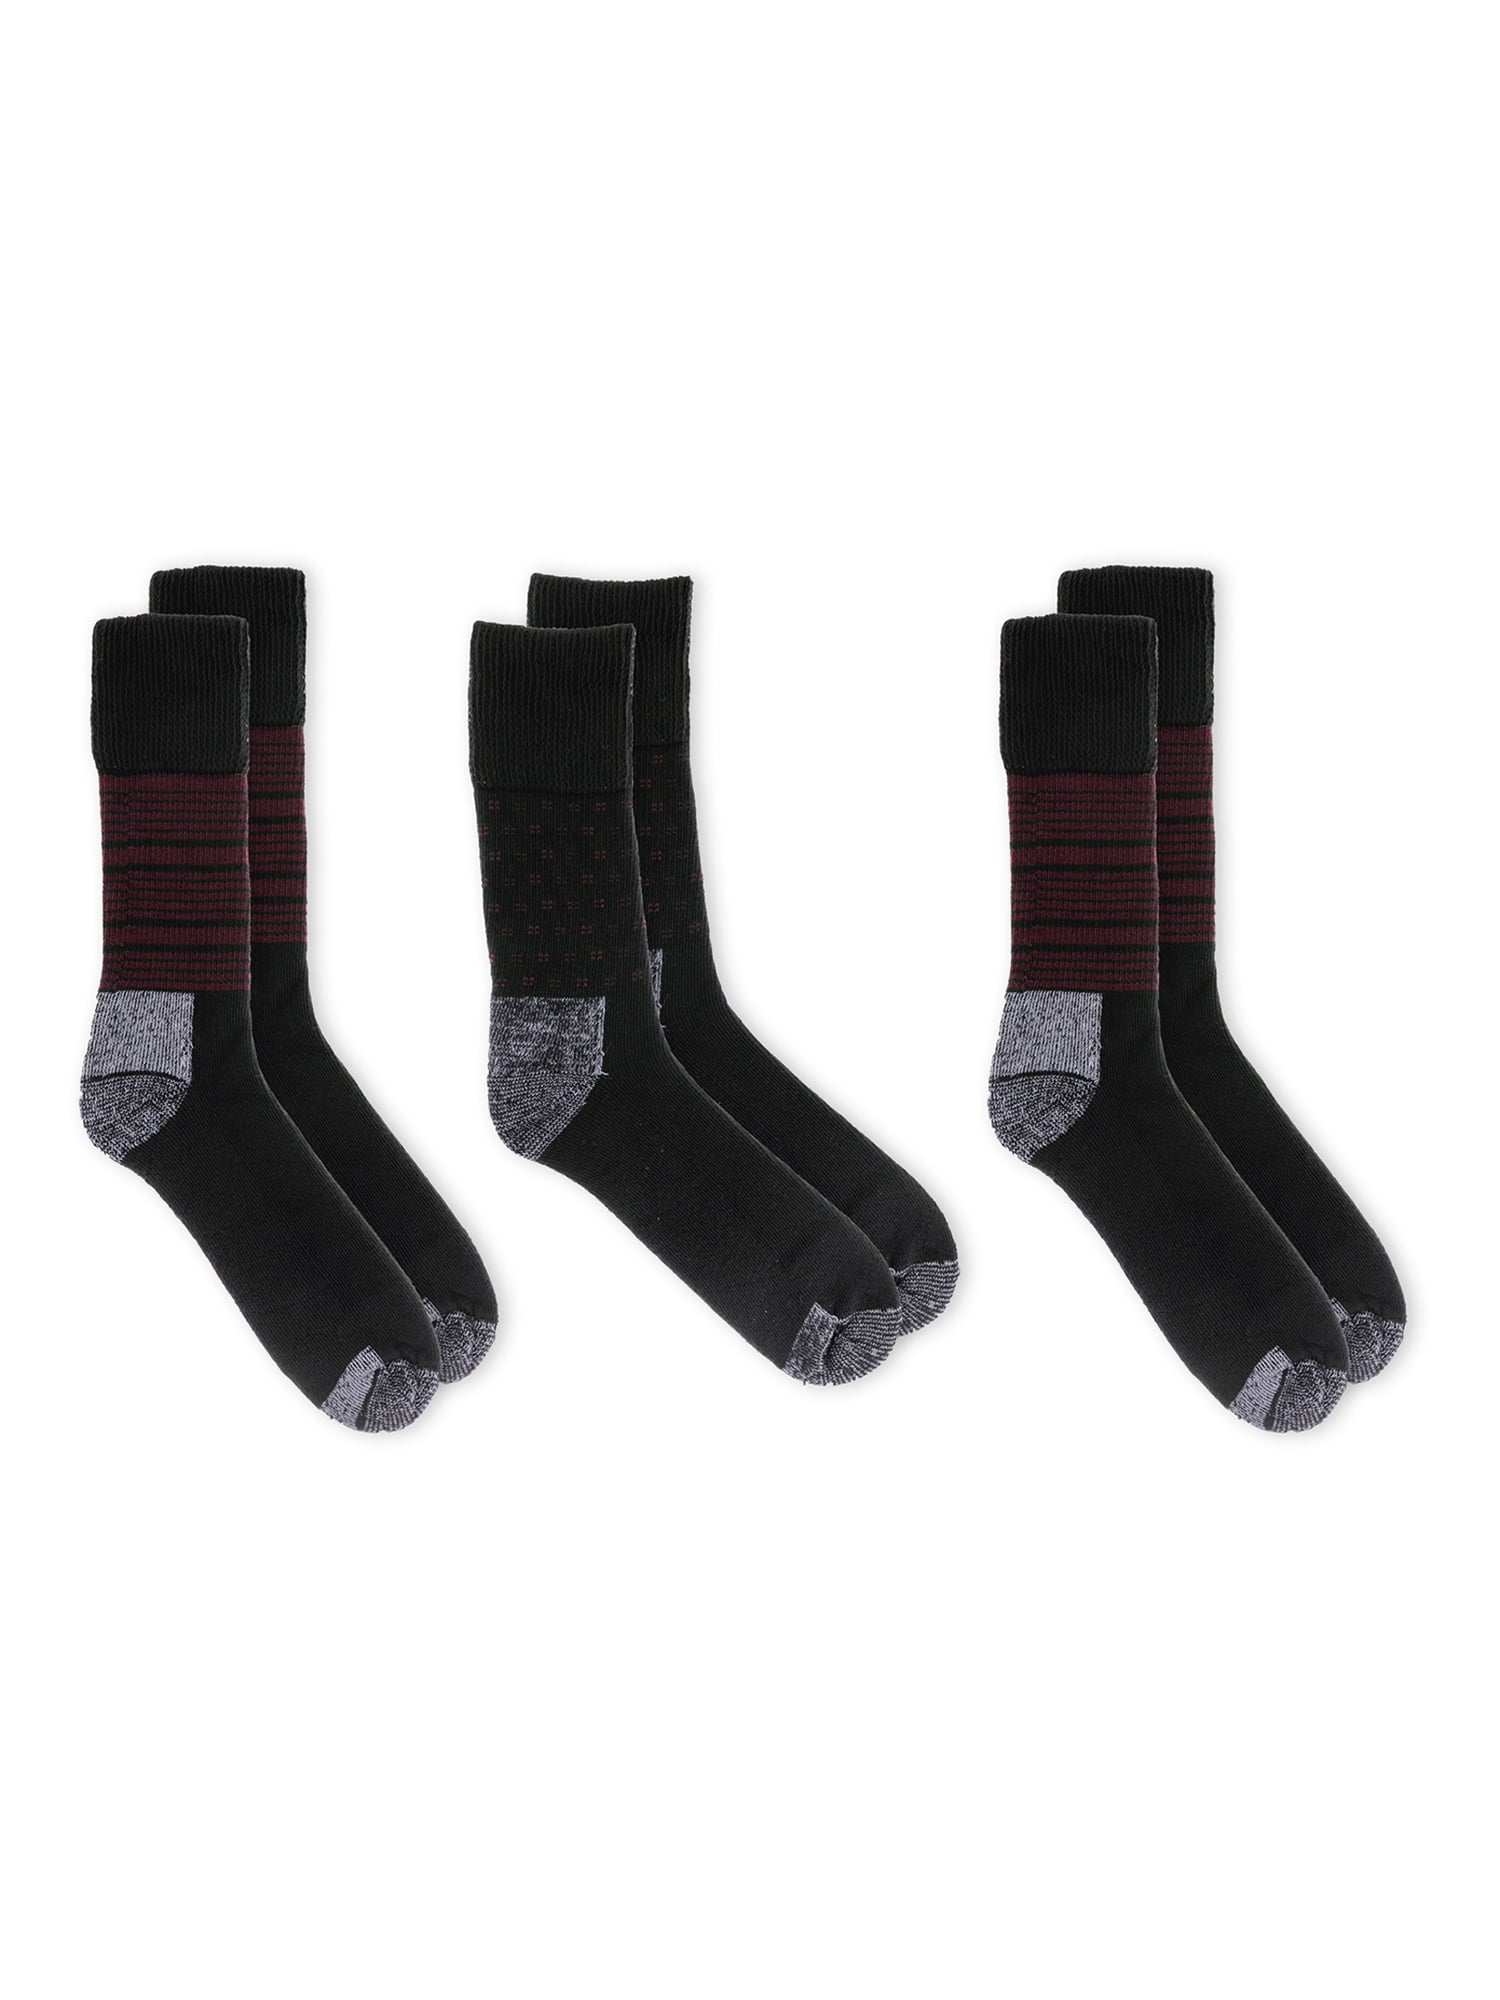 Dr. Scholl's Men's Advanced Relief Blister Guard® Casual Stripe Crew Socks, 3 Pack